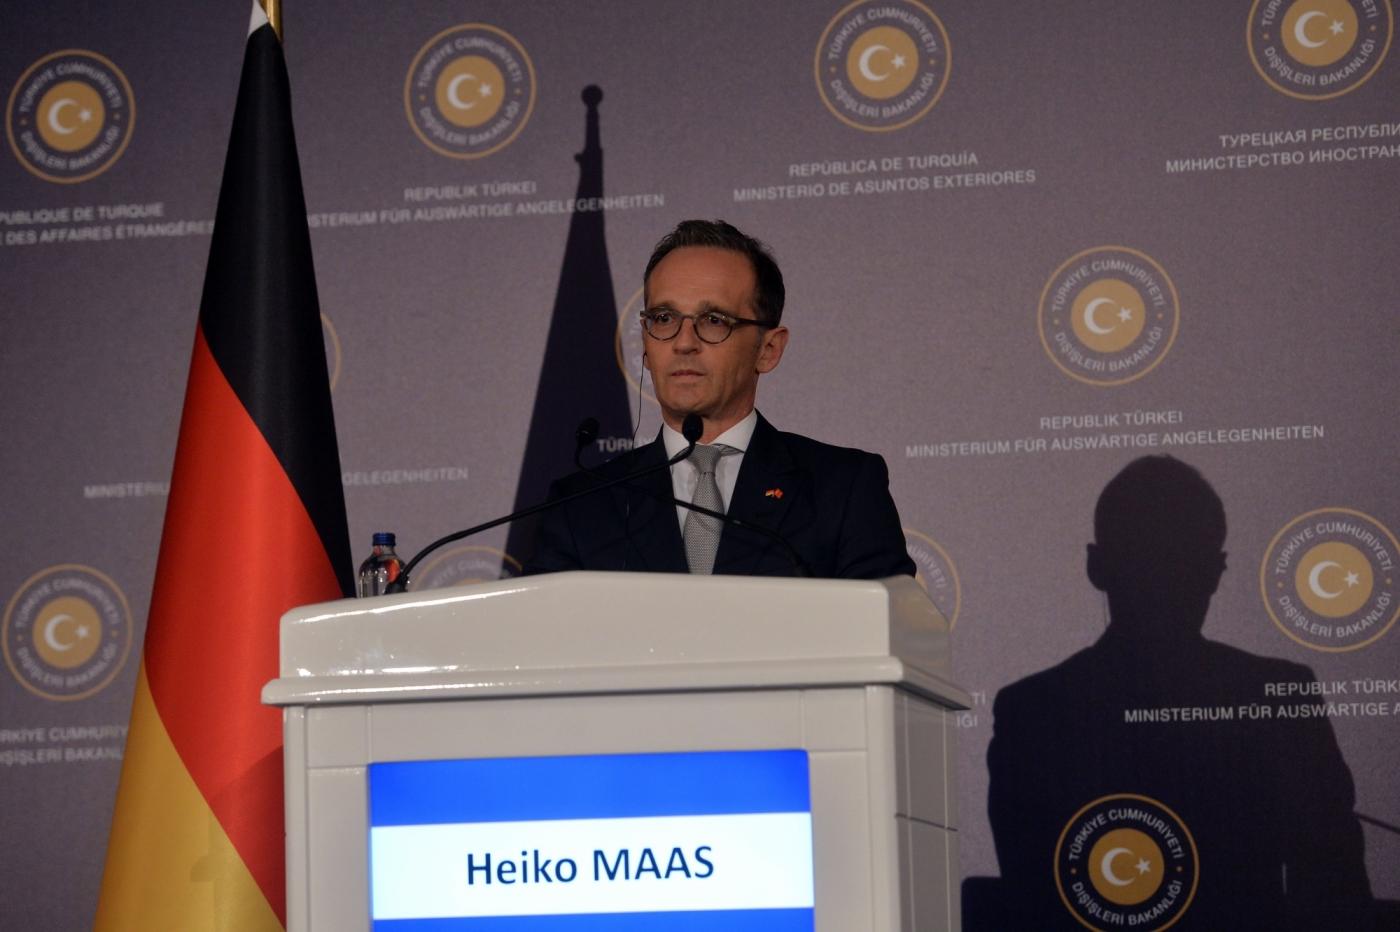 ANKARA, Sept. 5, 2018 (Xinhua) -- German Foreign Minister Heiko Maas speaks at a joint press conference with his Turkish counterpart Mevlut Cavusoglu (not seen in picture) in Ankara, Turkey, on Sept. 5, 2018. Turkey and Germany will work intensely to strengthen bilateral ties and prevent the escalation of conflicts in Syria's Idlib region, foreign ministers of the two countries stressed Wednesday in Ankara. (Xinhua/Mustafa Kaya/IANS) by .